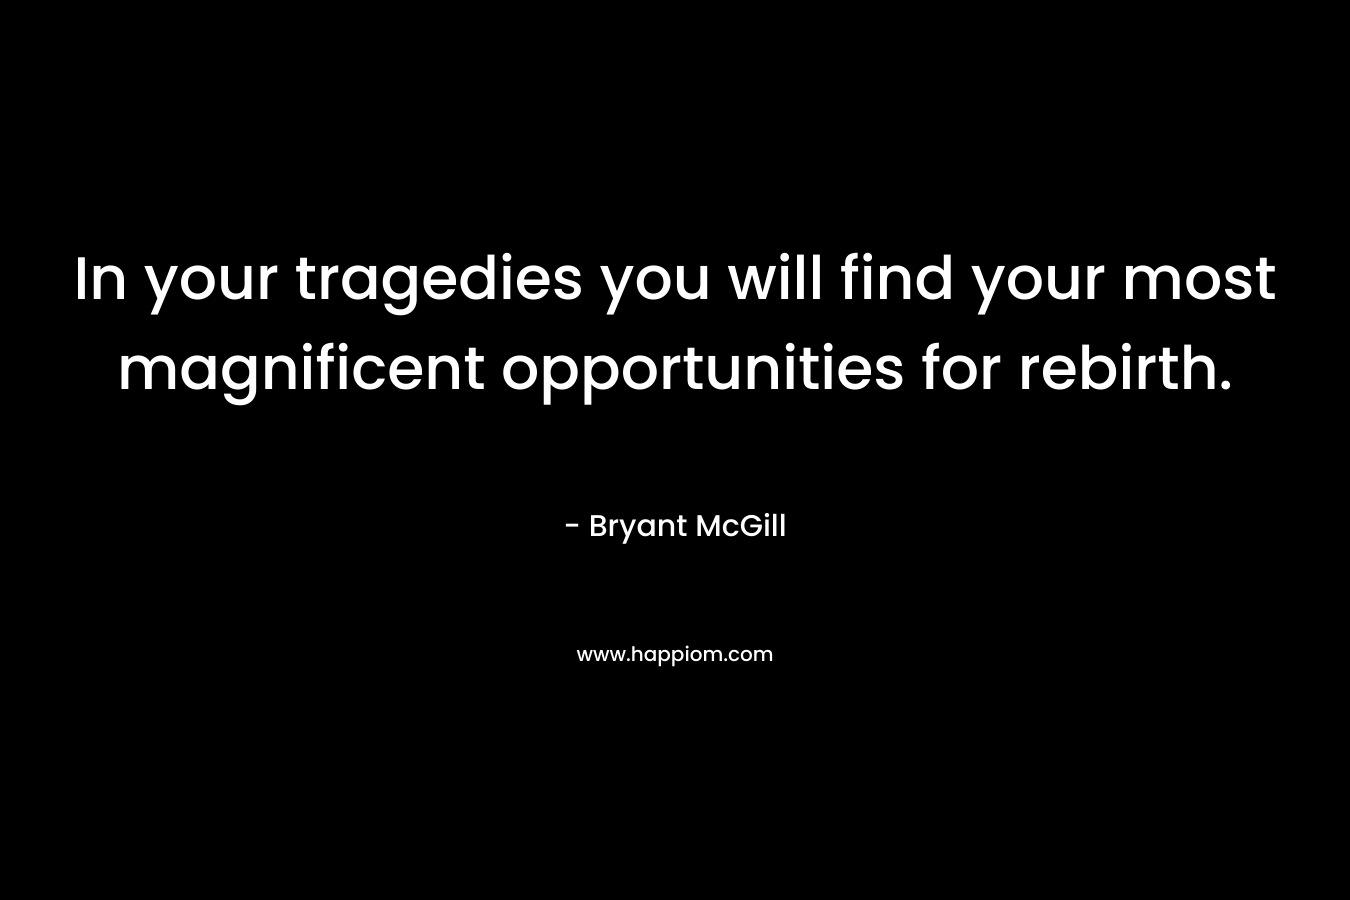 In your tragedies you will find your most magnificent opportunities for rebirth.